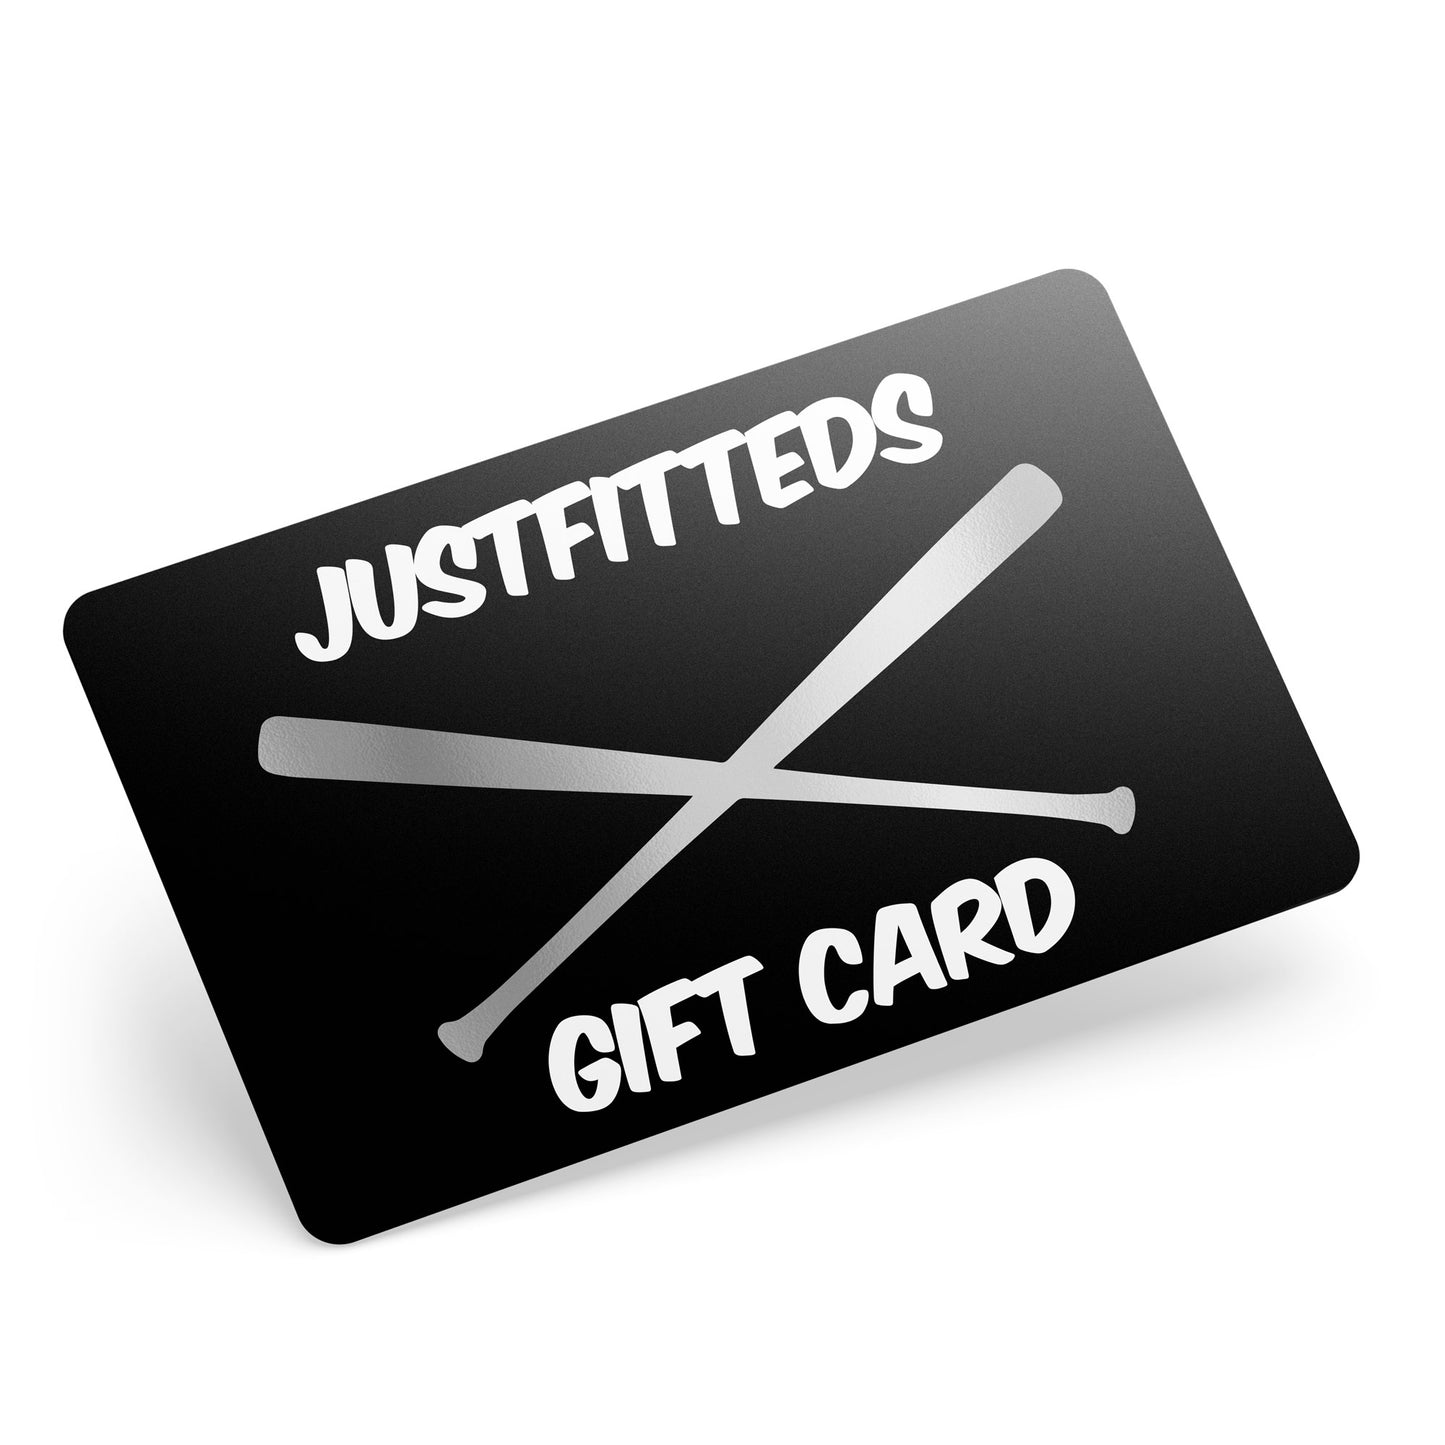 JustFitteds Gift Card